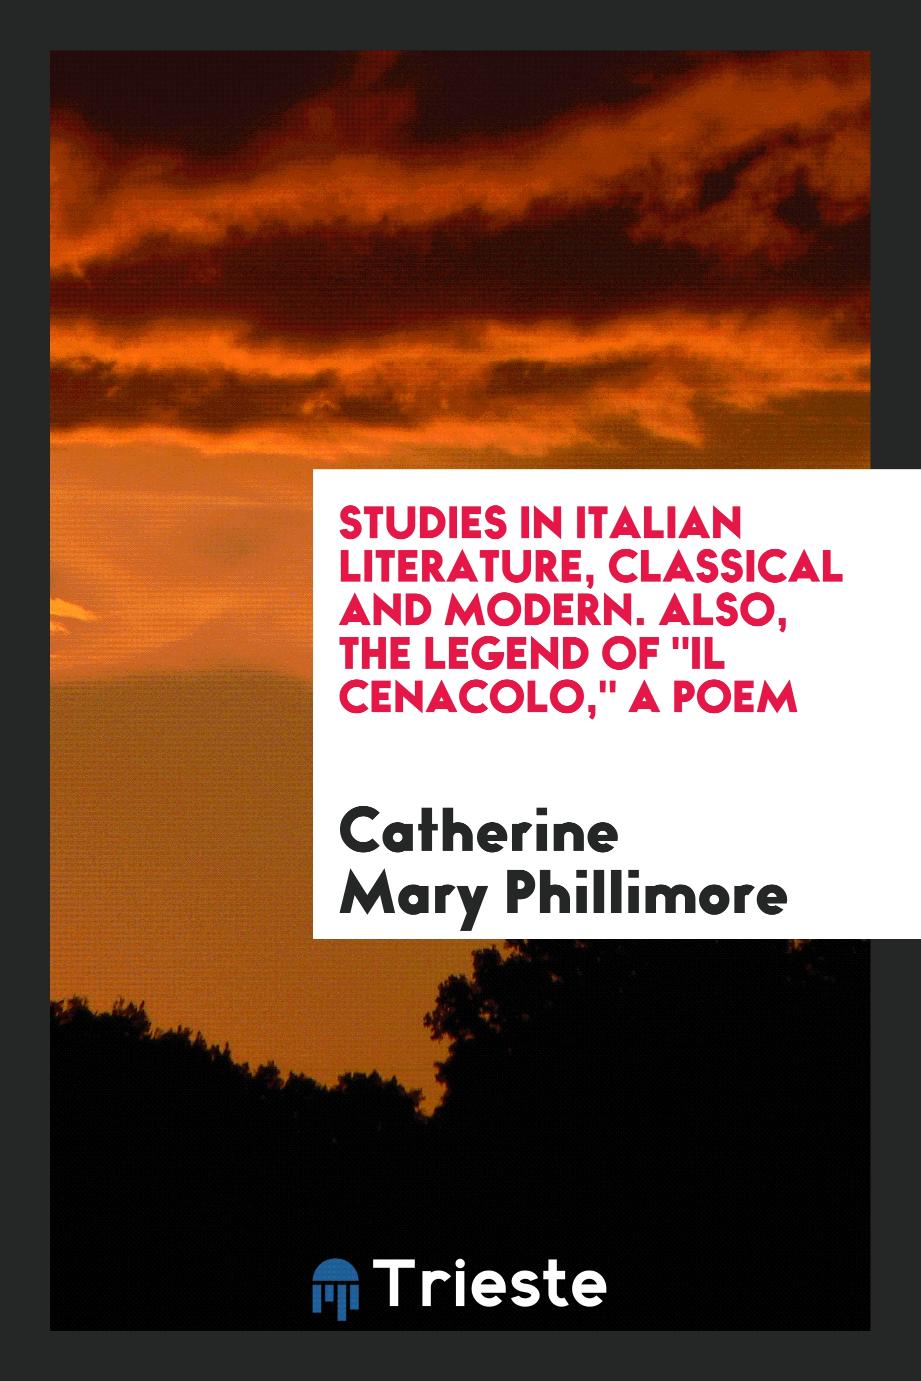 Studies in Italian Literature, Classical and Modern. Also, the Legend Of "Il Cenacolo," a Poem